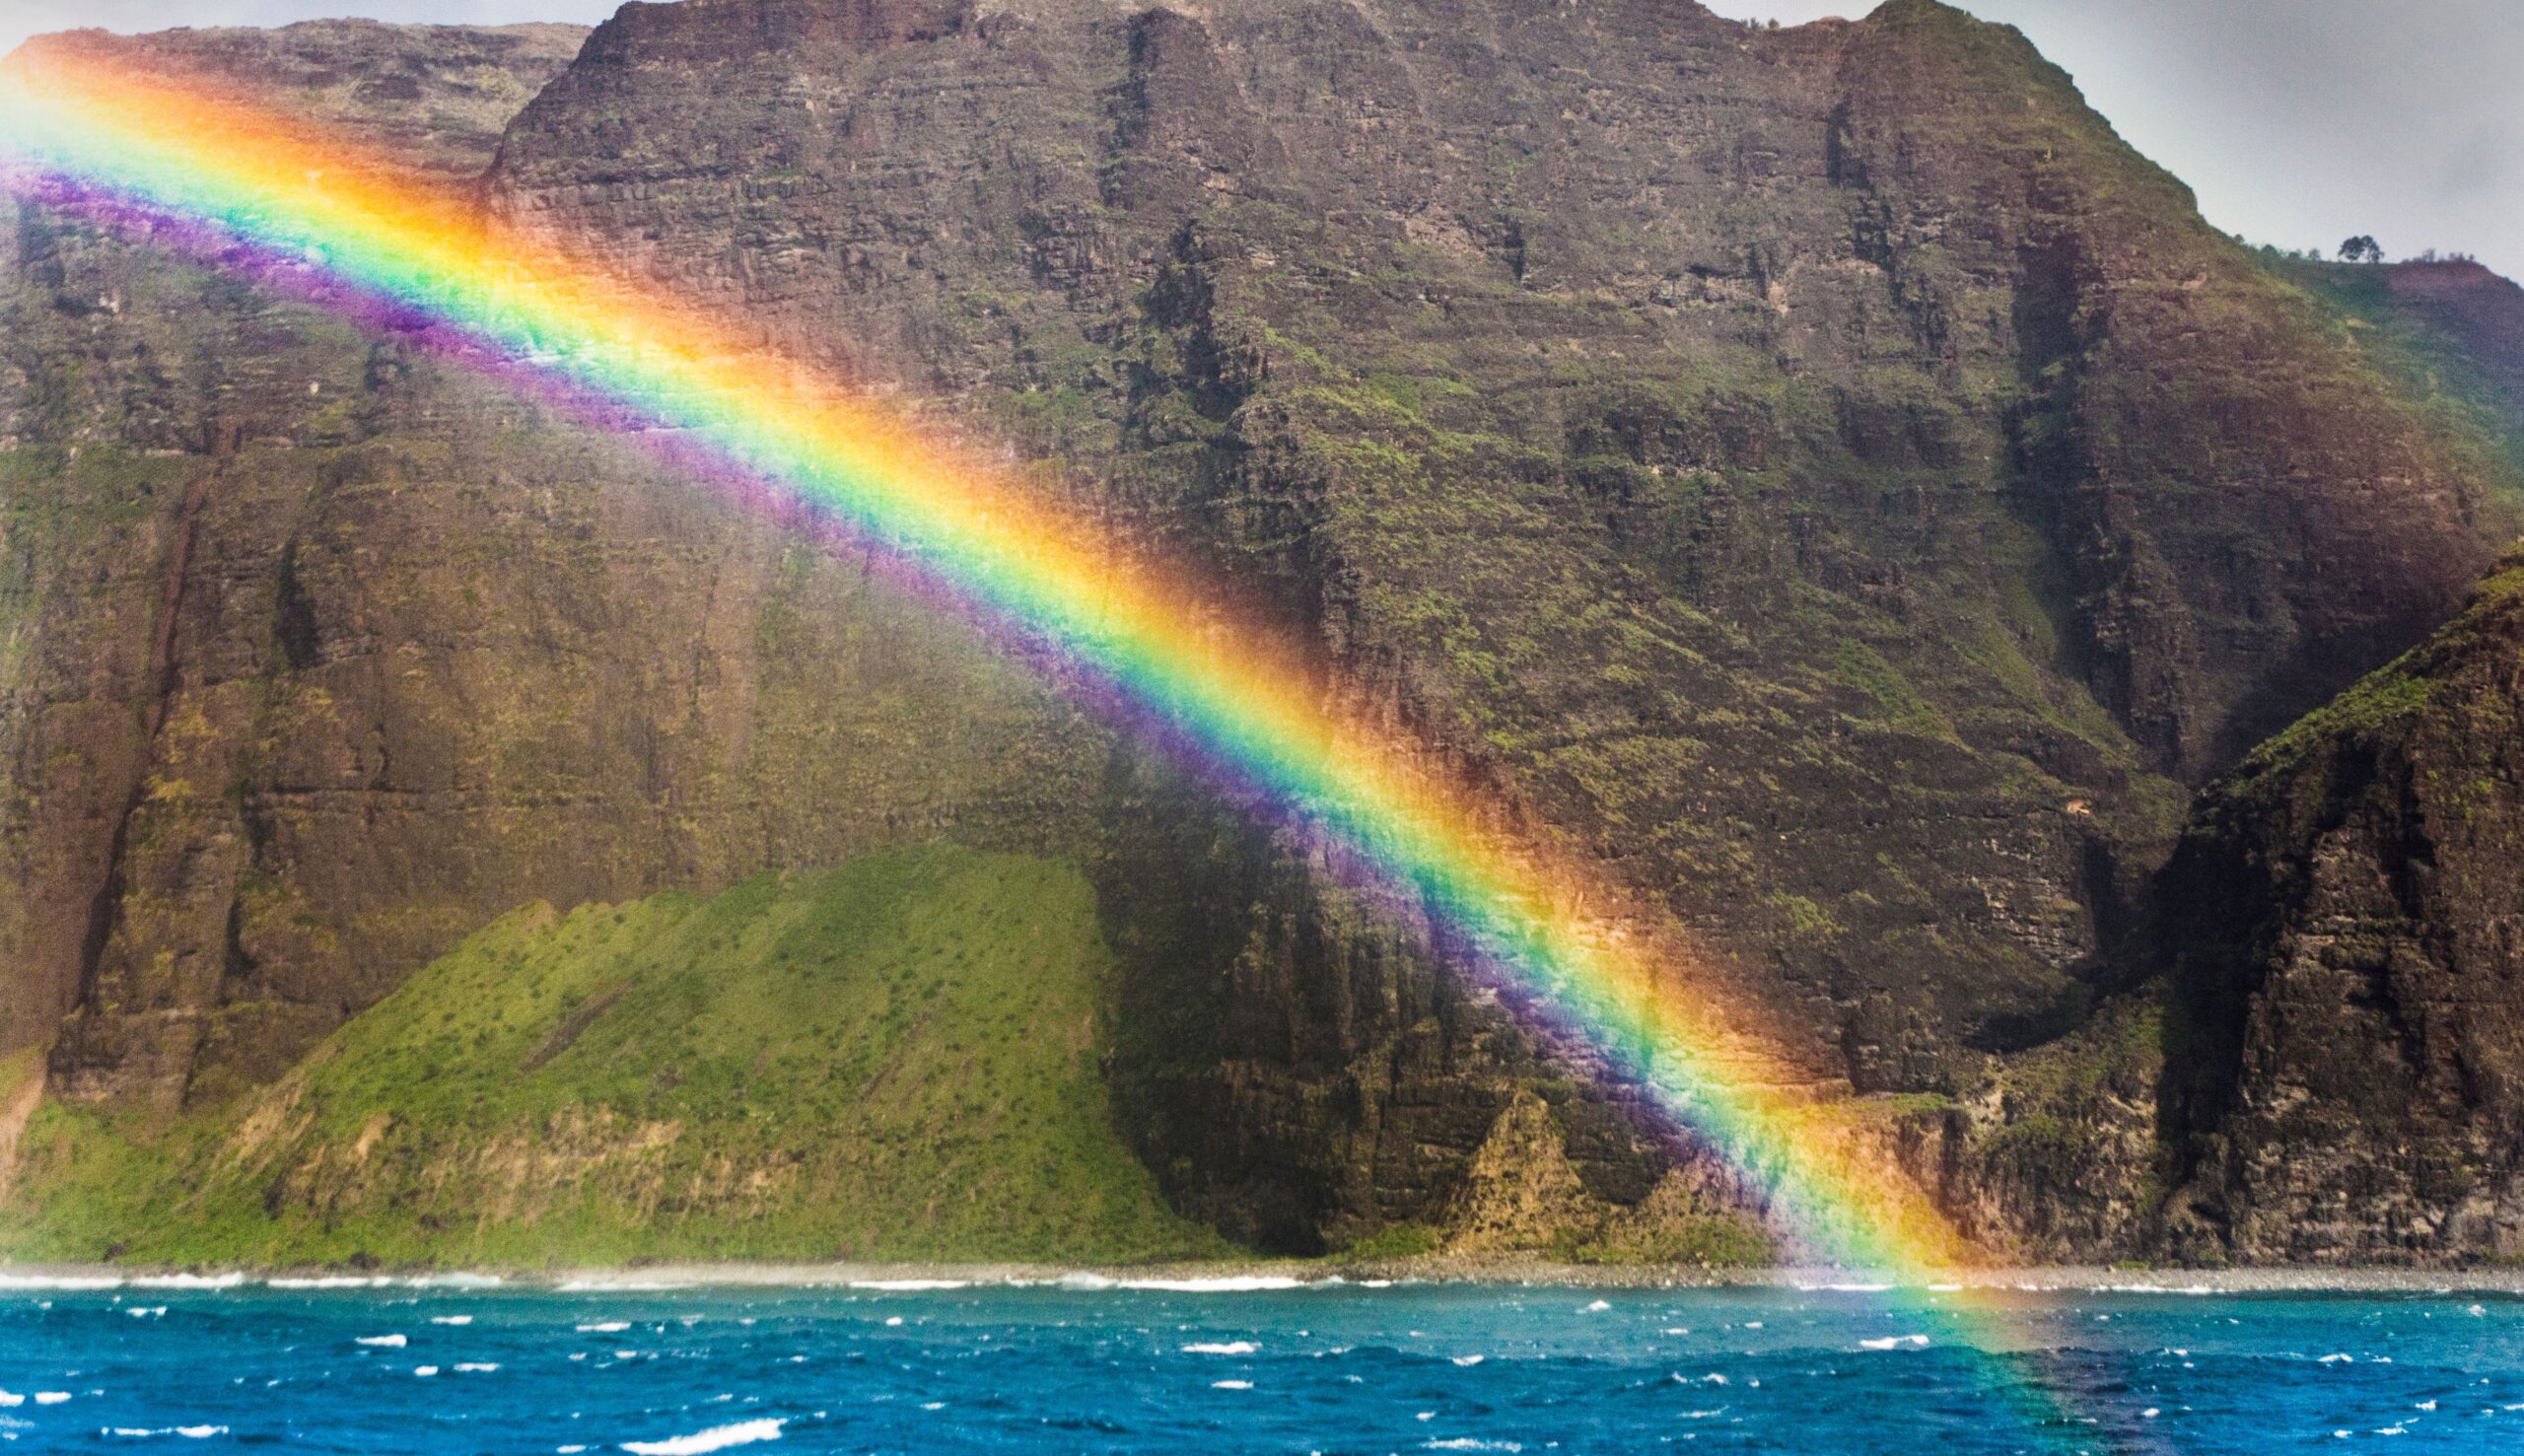 Did You Know Hawaii is the Rainbow Capital of the World?